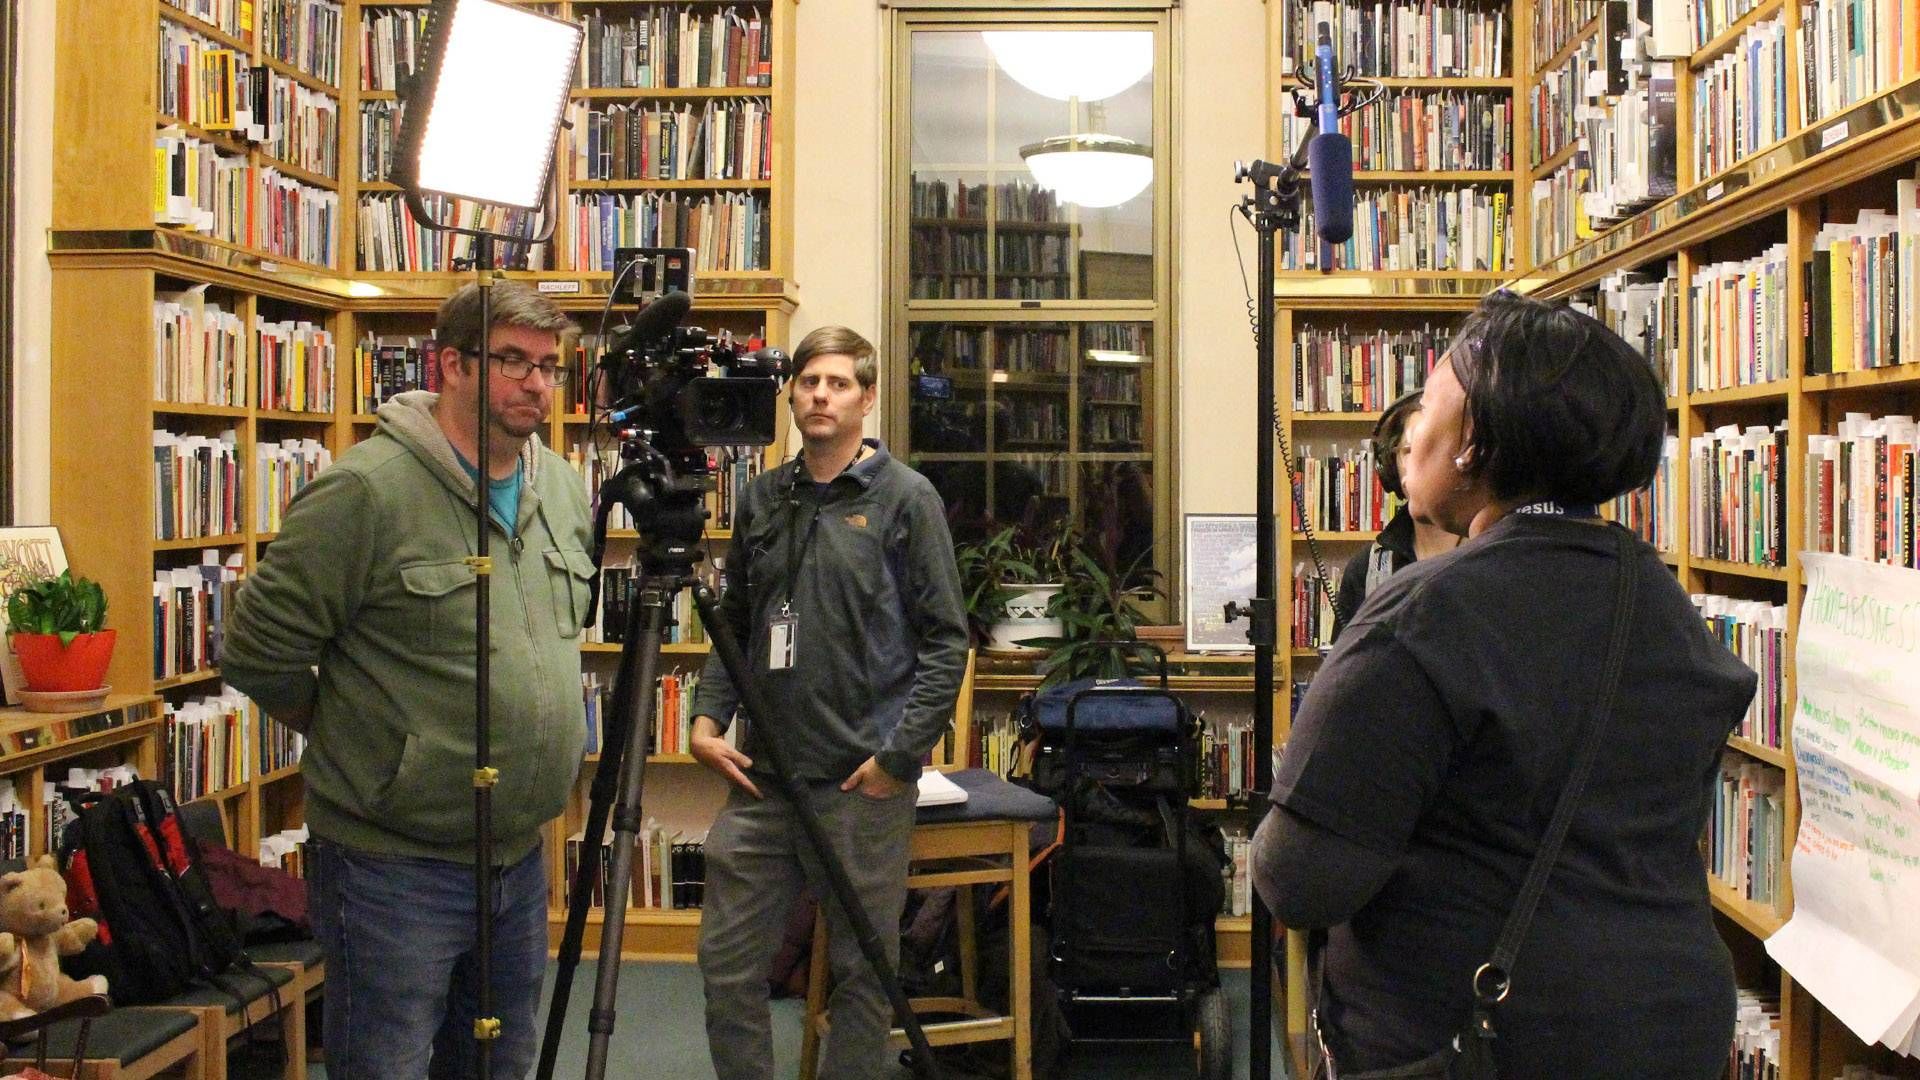 A man conducts a video inyterview with a woman inside of a library